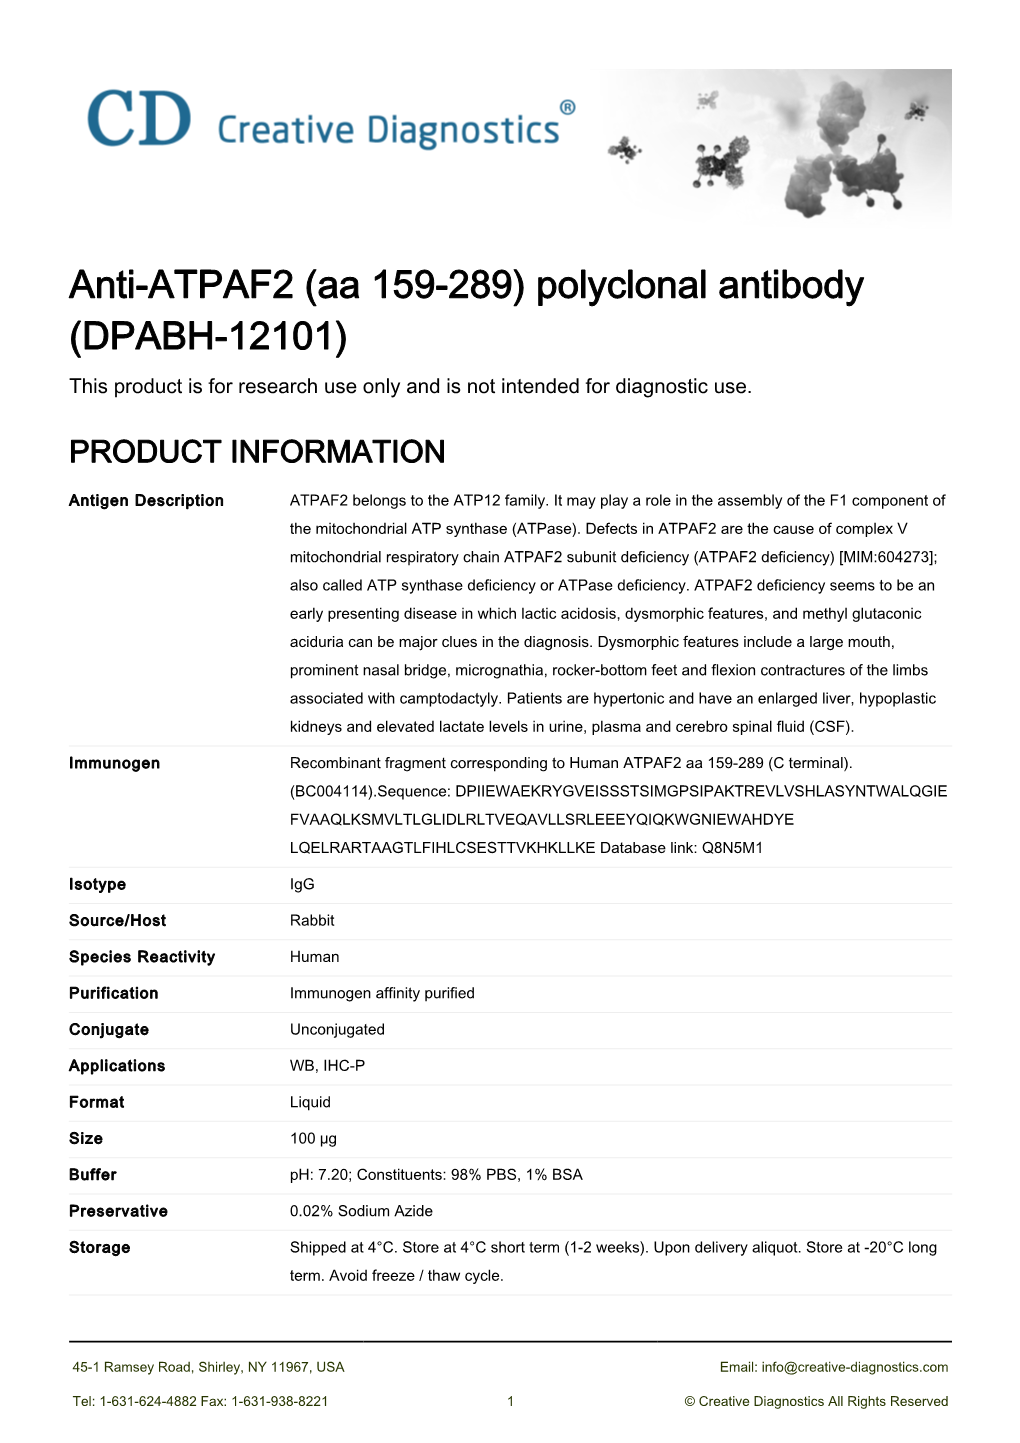 Anti-ATPAF2 (Aa 159-289) Polyclonal Antibody (DPABH-12101) This Product Is for Research Use Only and Is Not Intended for Diagnostic Use